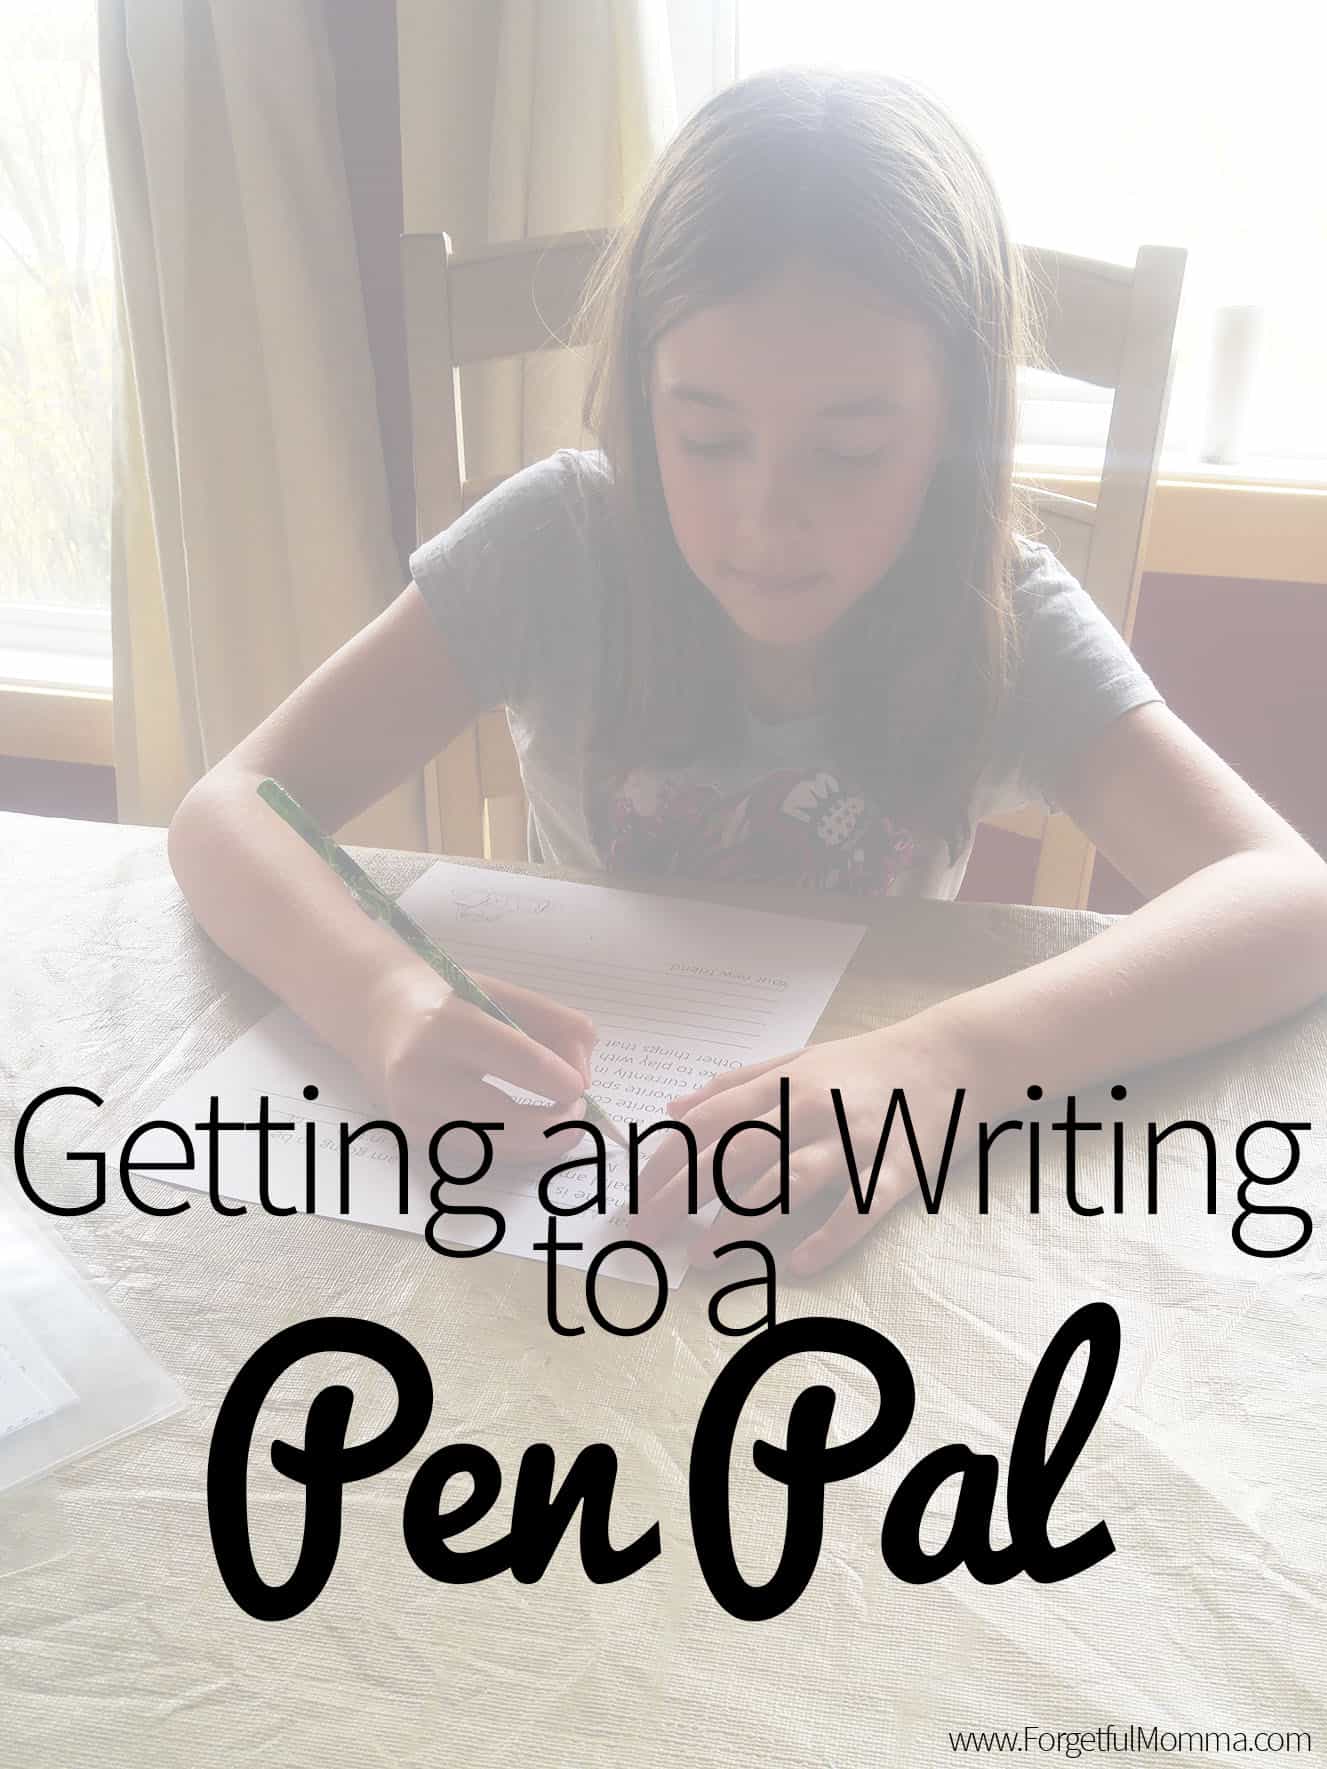 Getting and Writing to A Pen Pal